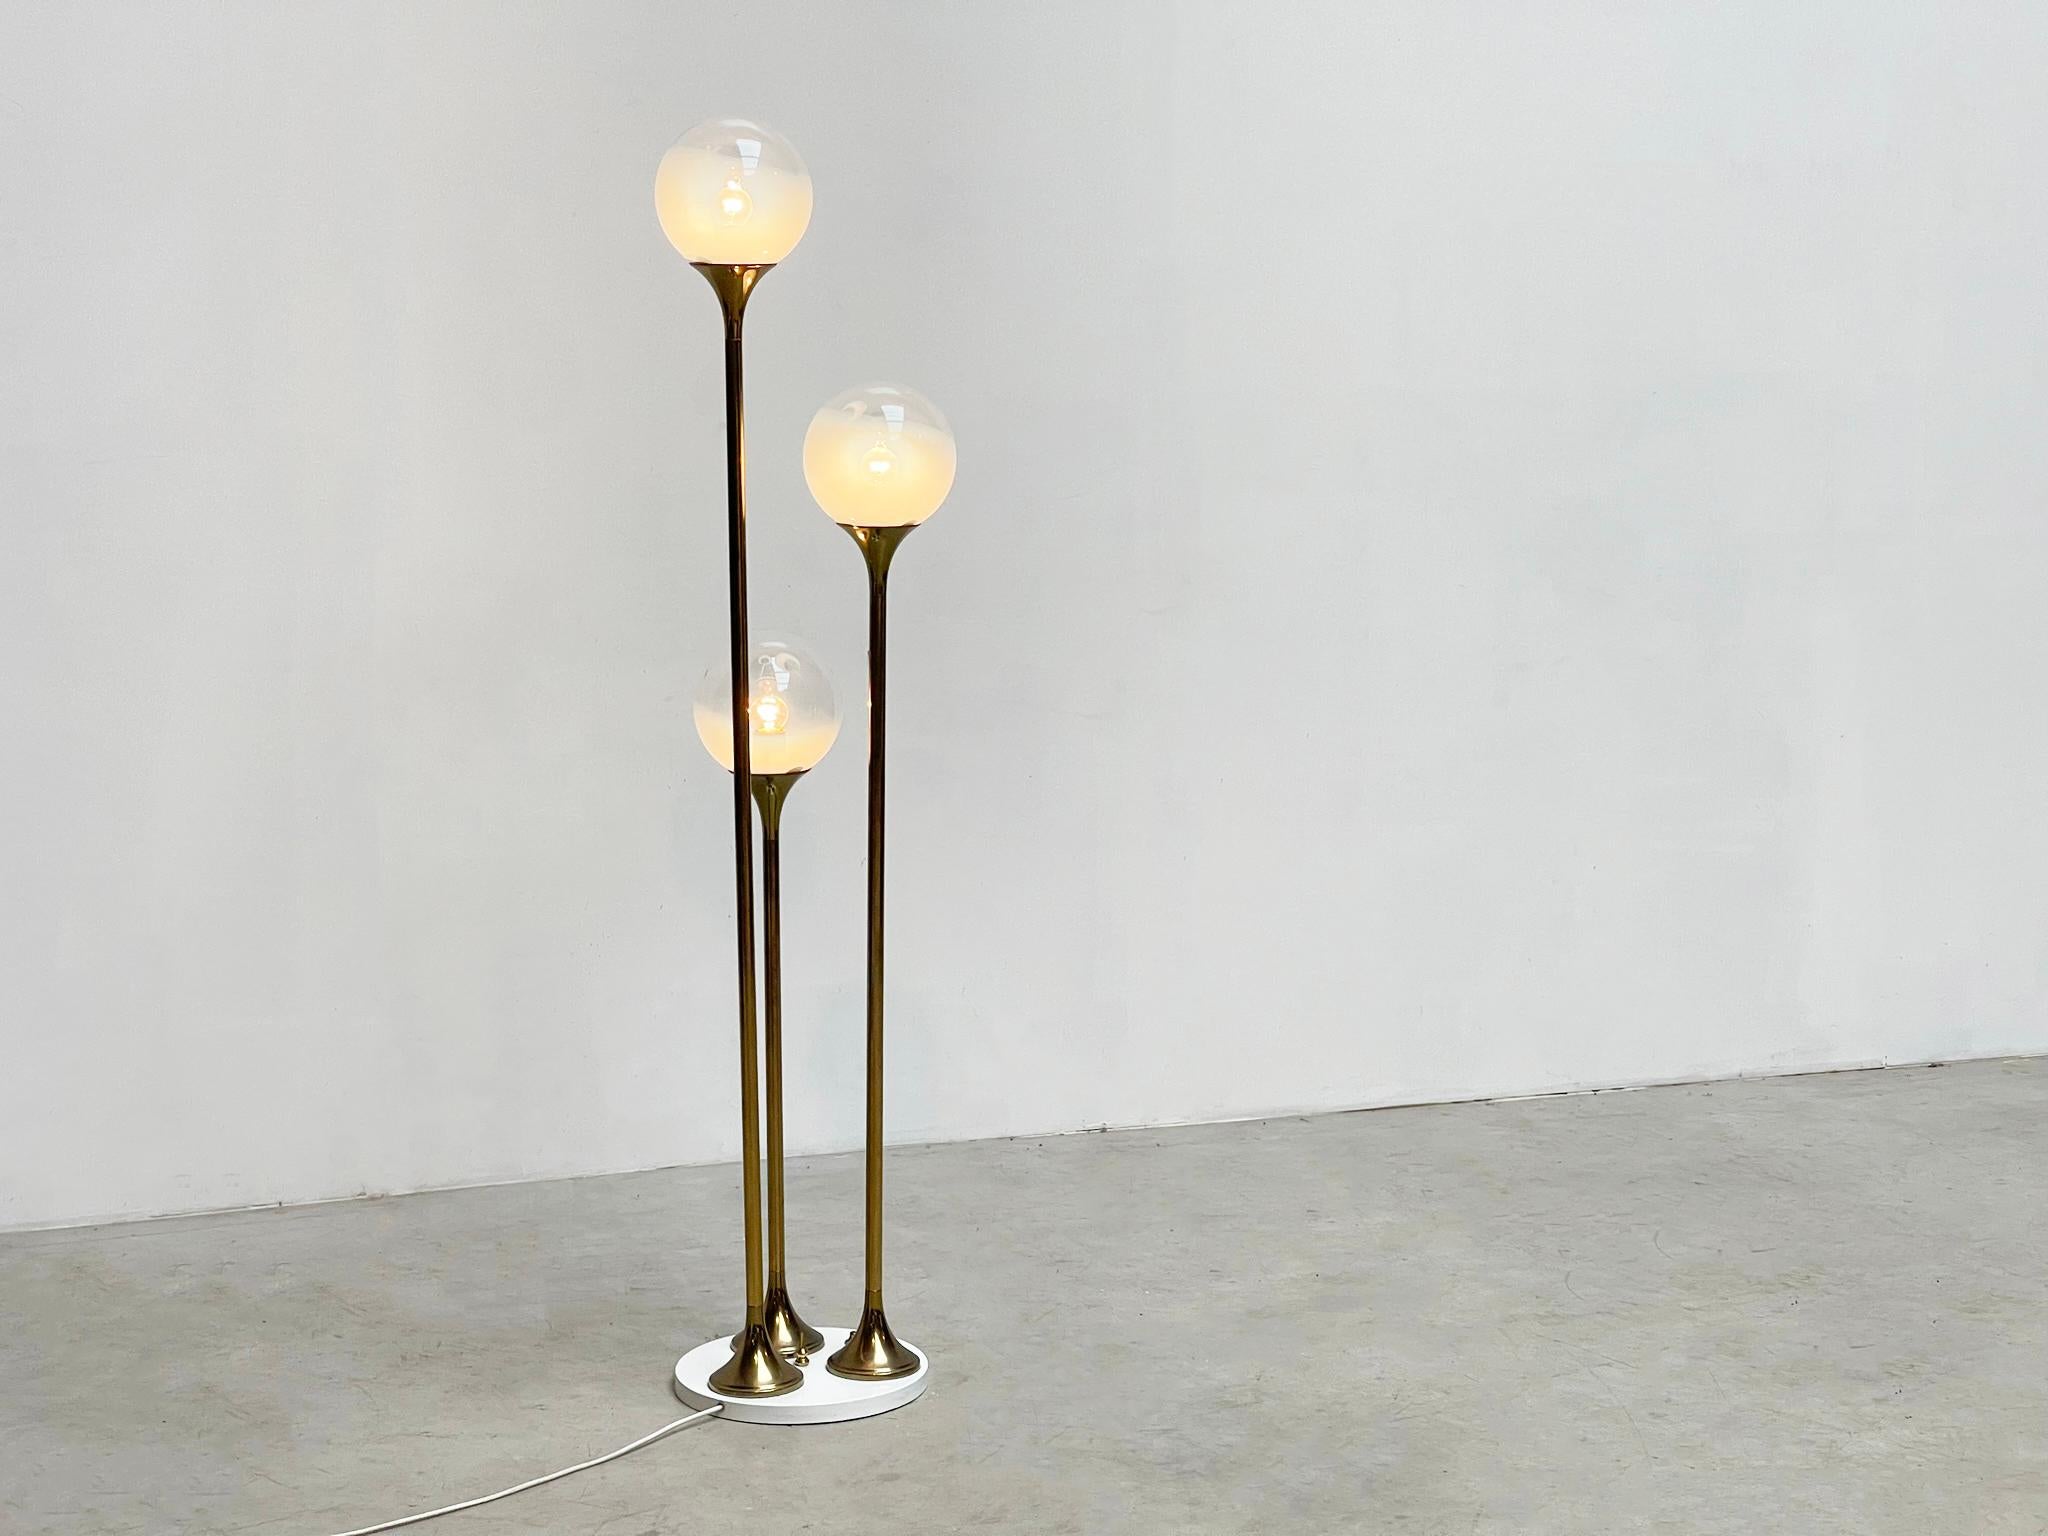 Targetti Sankey Floorlamp
Wonderful floor lamp with three light points  by the famous Italian designer Targetti Sankey. The lamp features three milk glass spheres on three brass stems on a black lacquered metal base. The switch is multi-functional